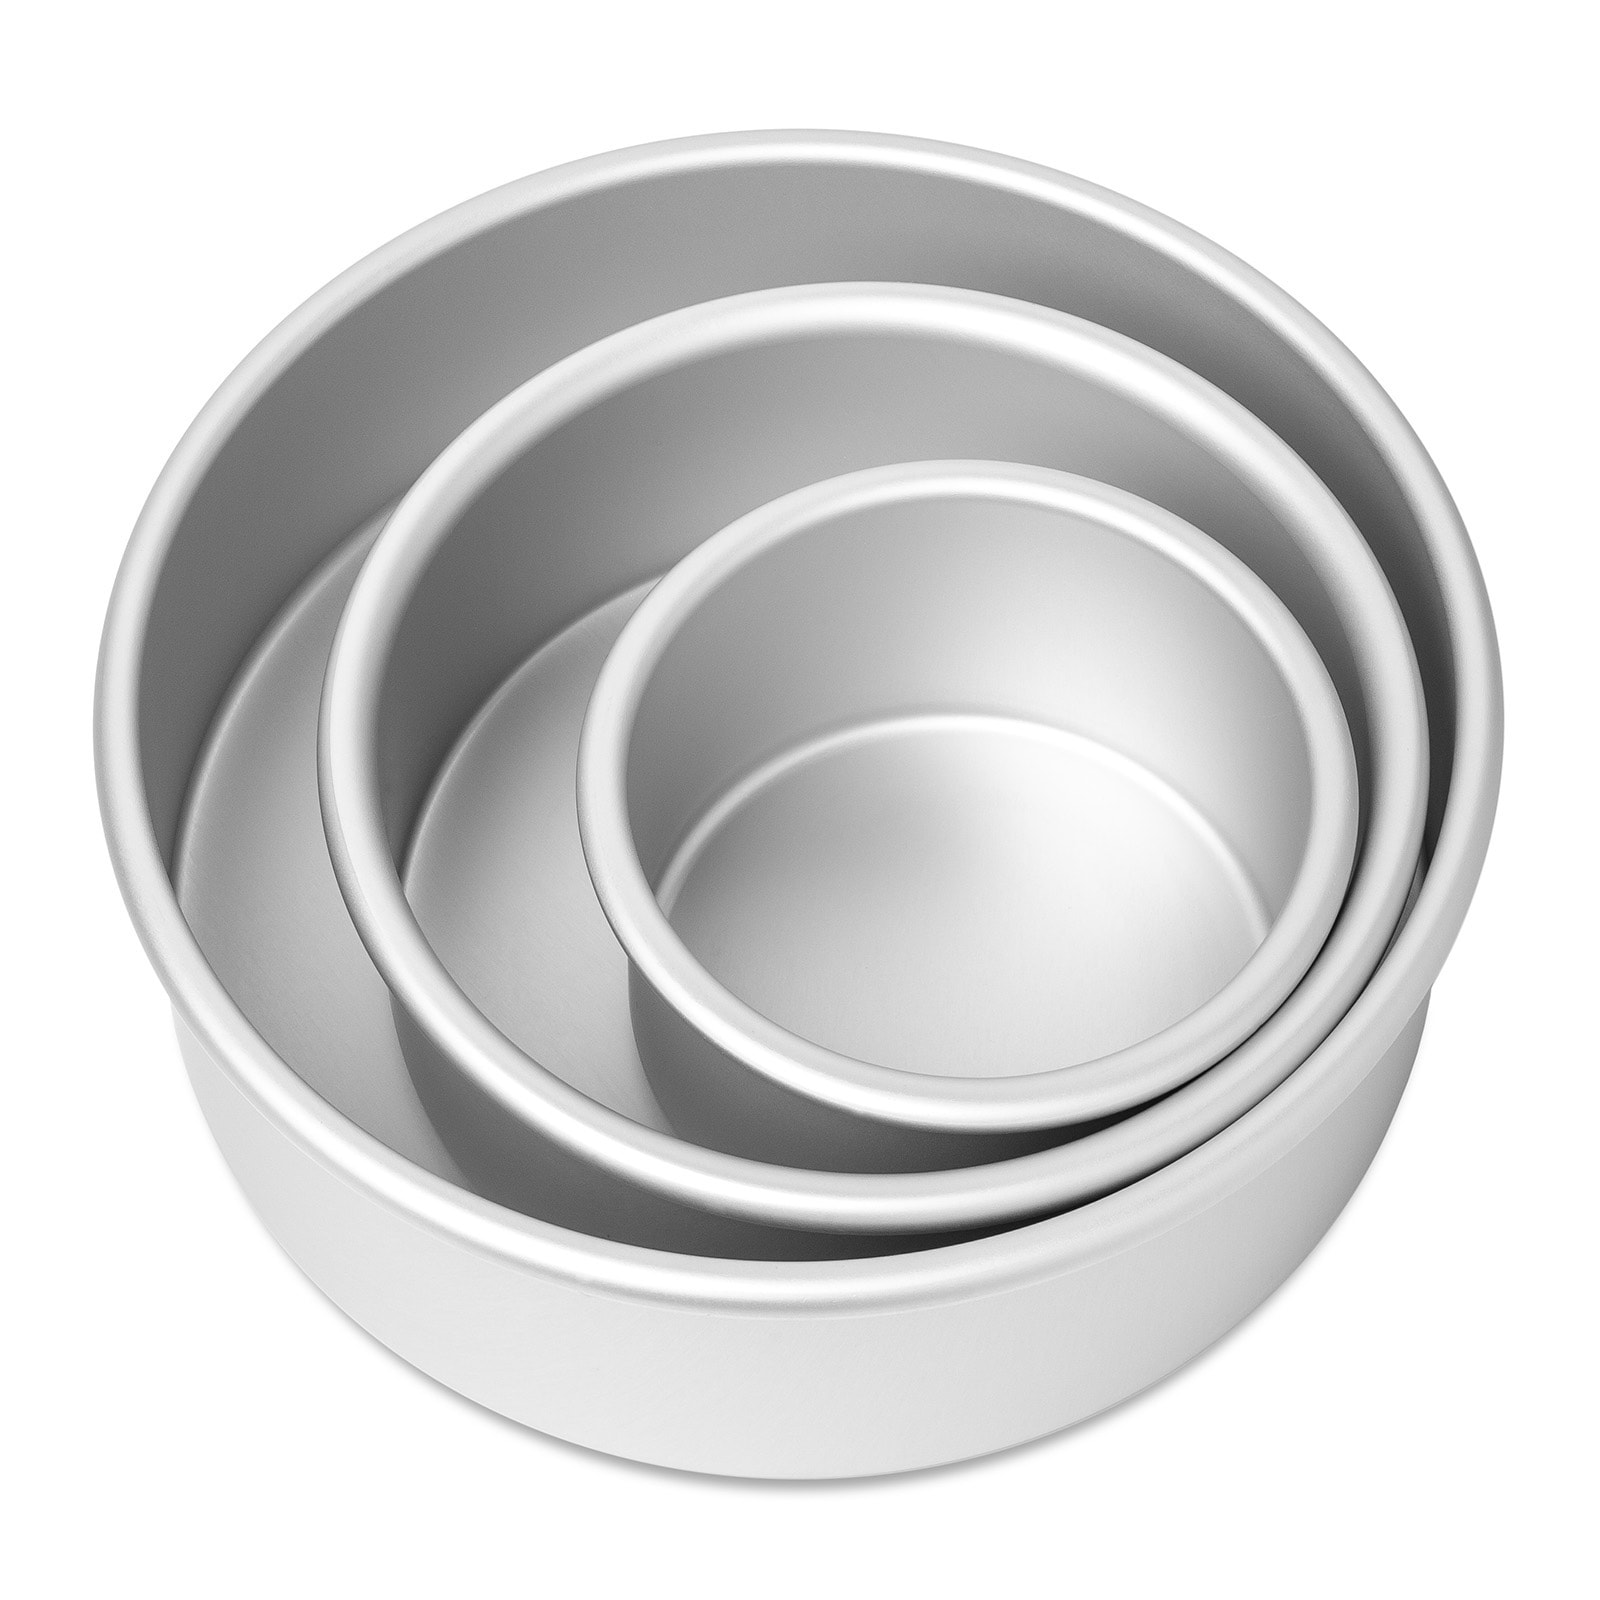 https://ak1.ostkcdn.com/images/products/is/images/direct/7aa74866548c3f31bd051e511ce02359a4ab40cb/Round-Aluminum-Cake-Pan-Sets---Last-Confection.jpg